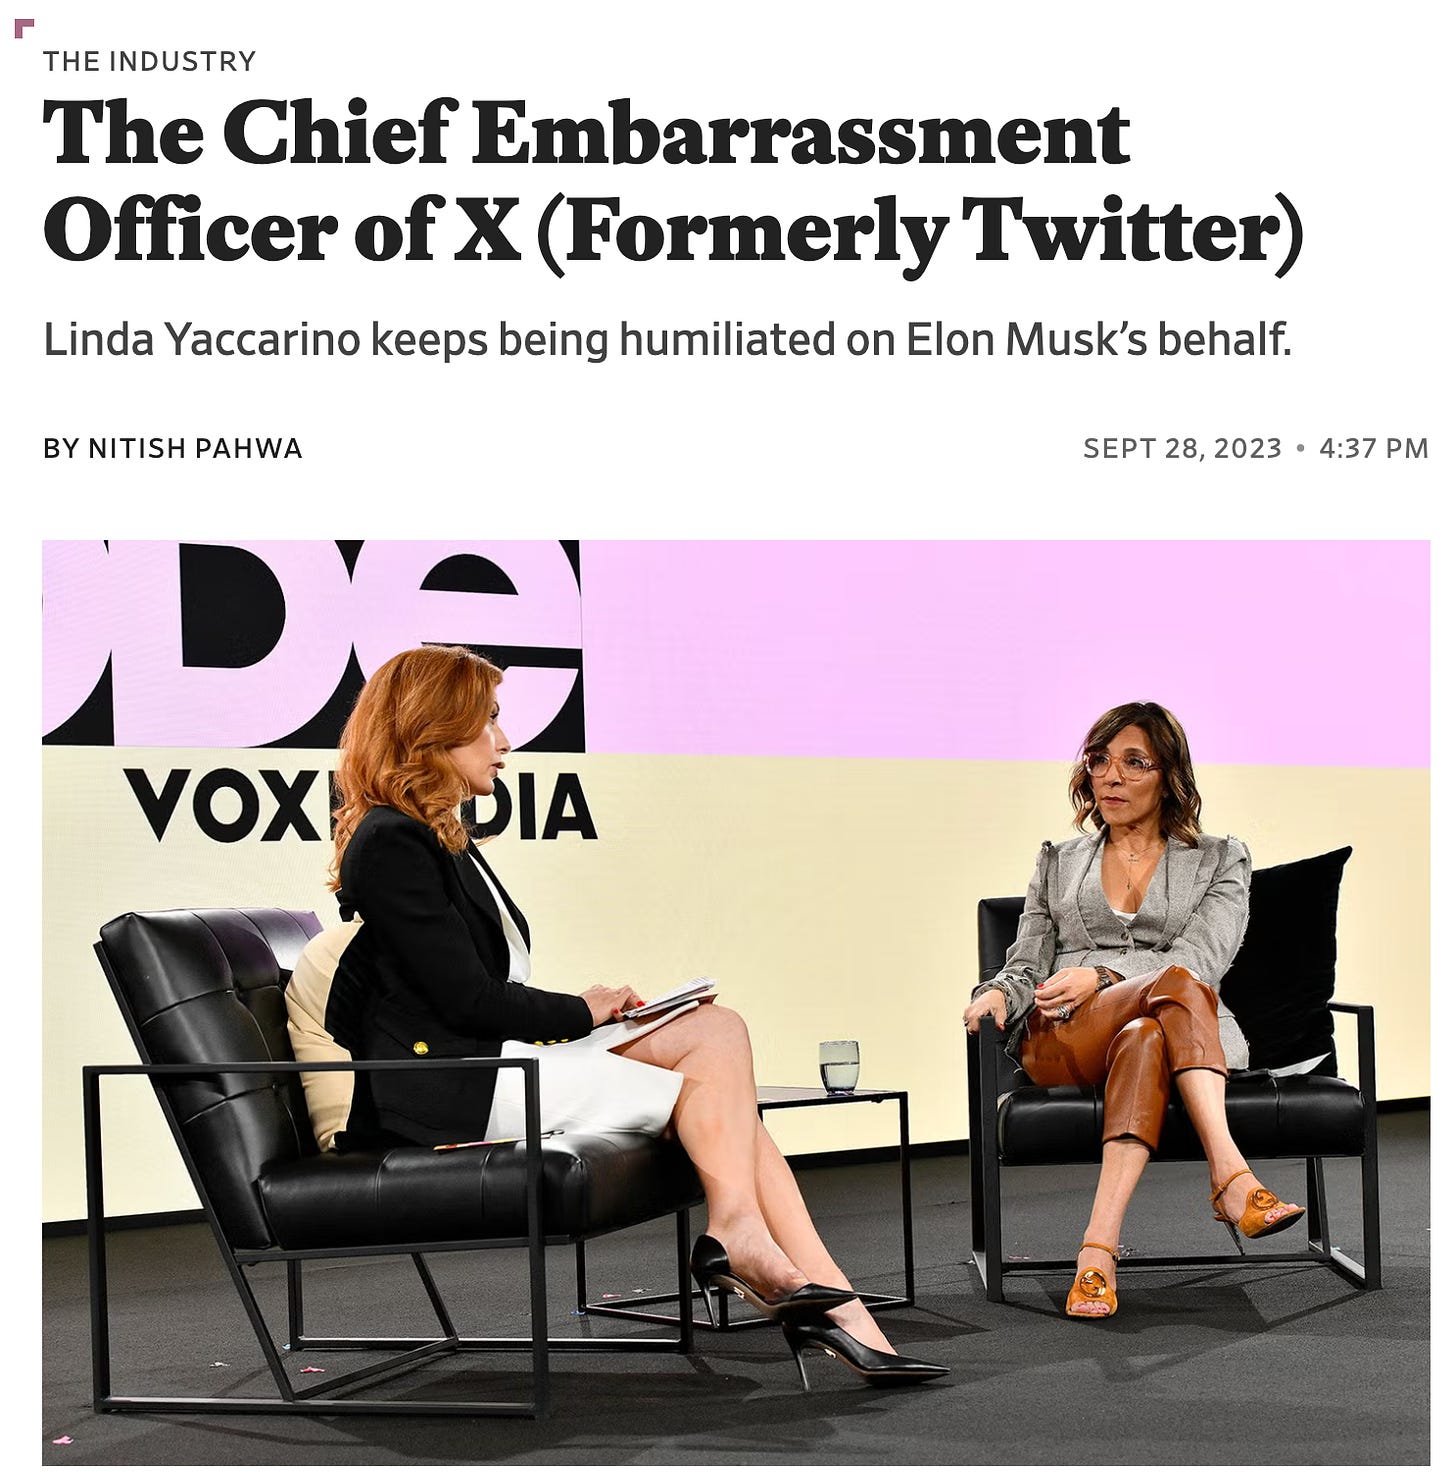 A Slate headline reading “The Chief Embarrassment Officer of X (Formerly Twitter): Linda Yaccarino keeps being humiliated on Elon Musk’s behalf.” 